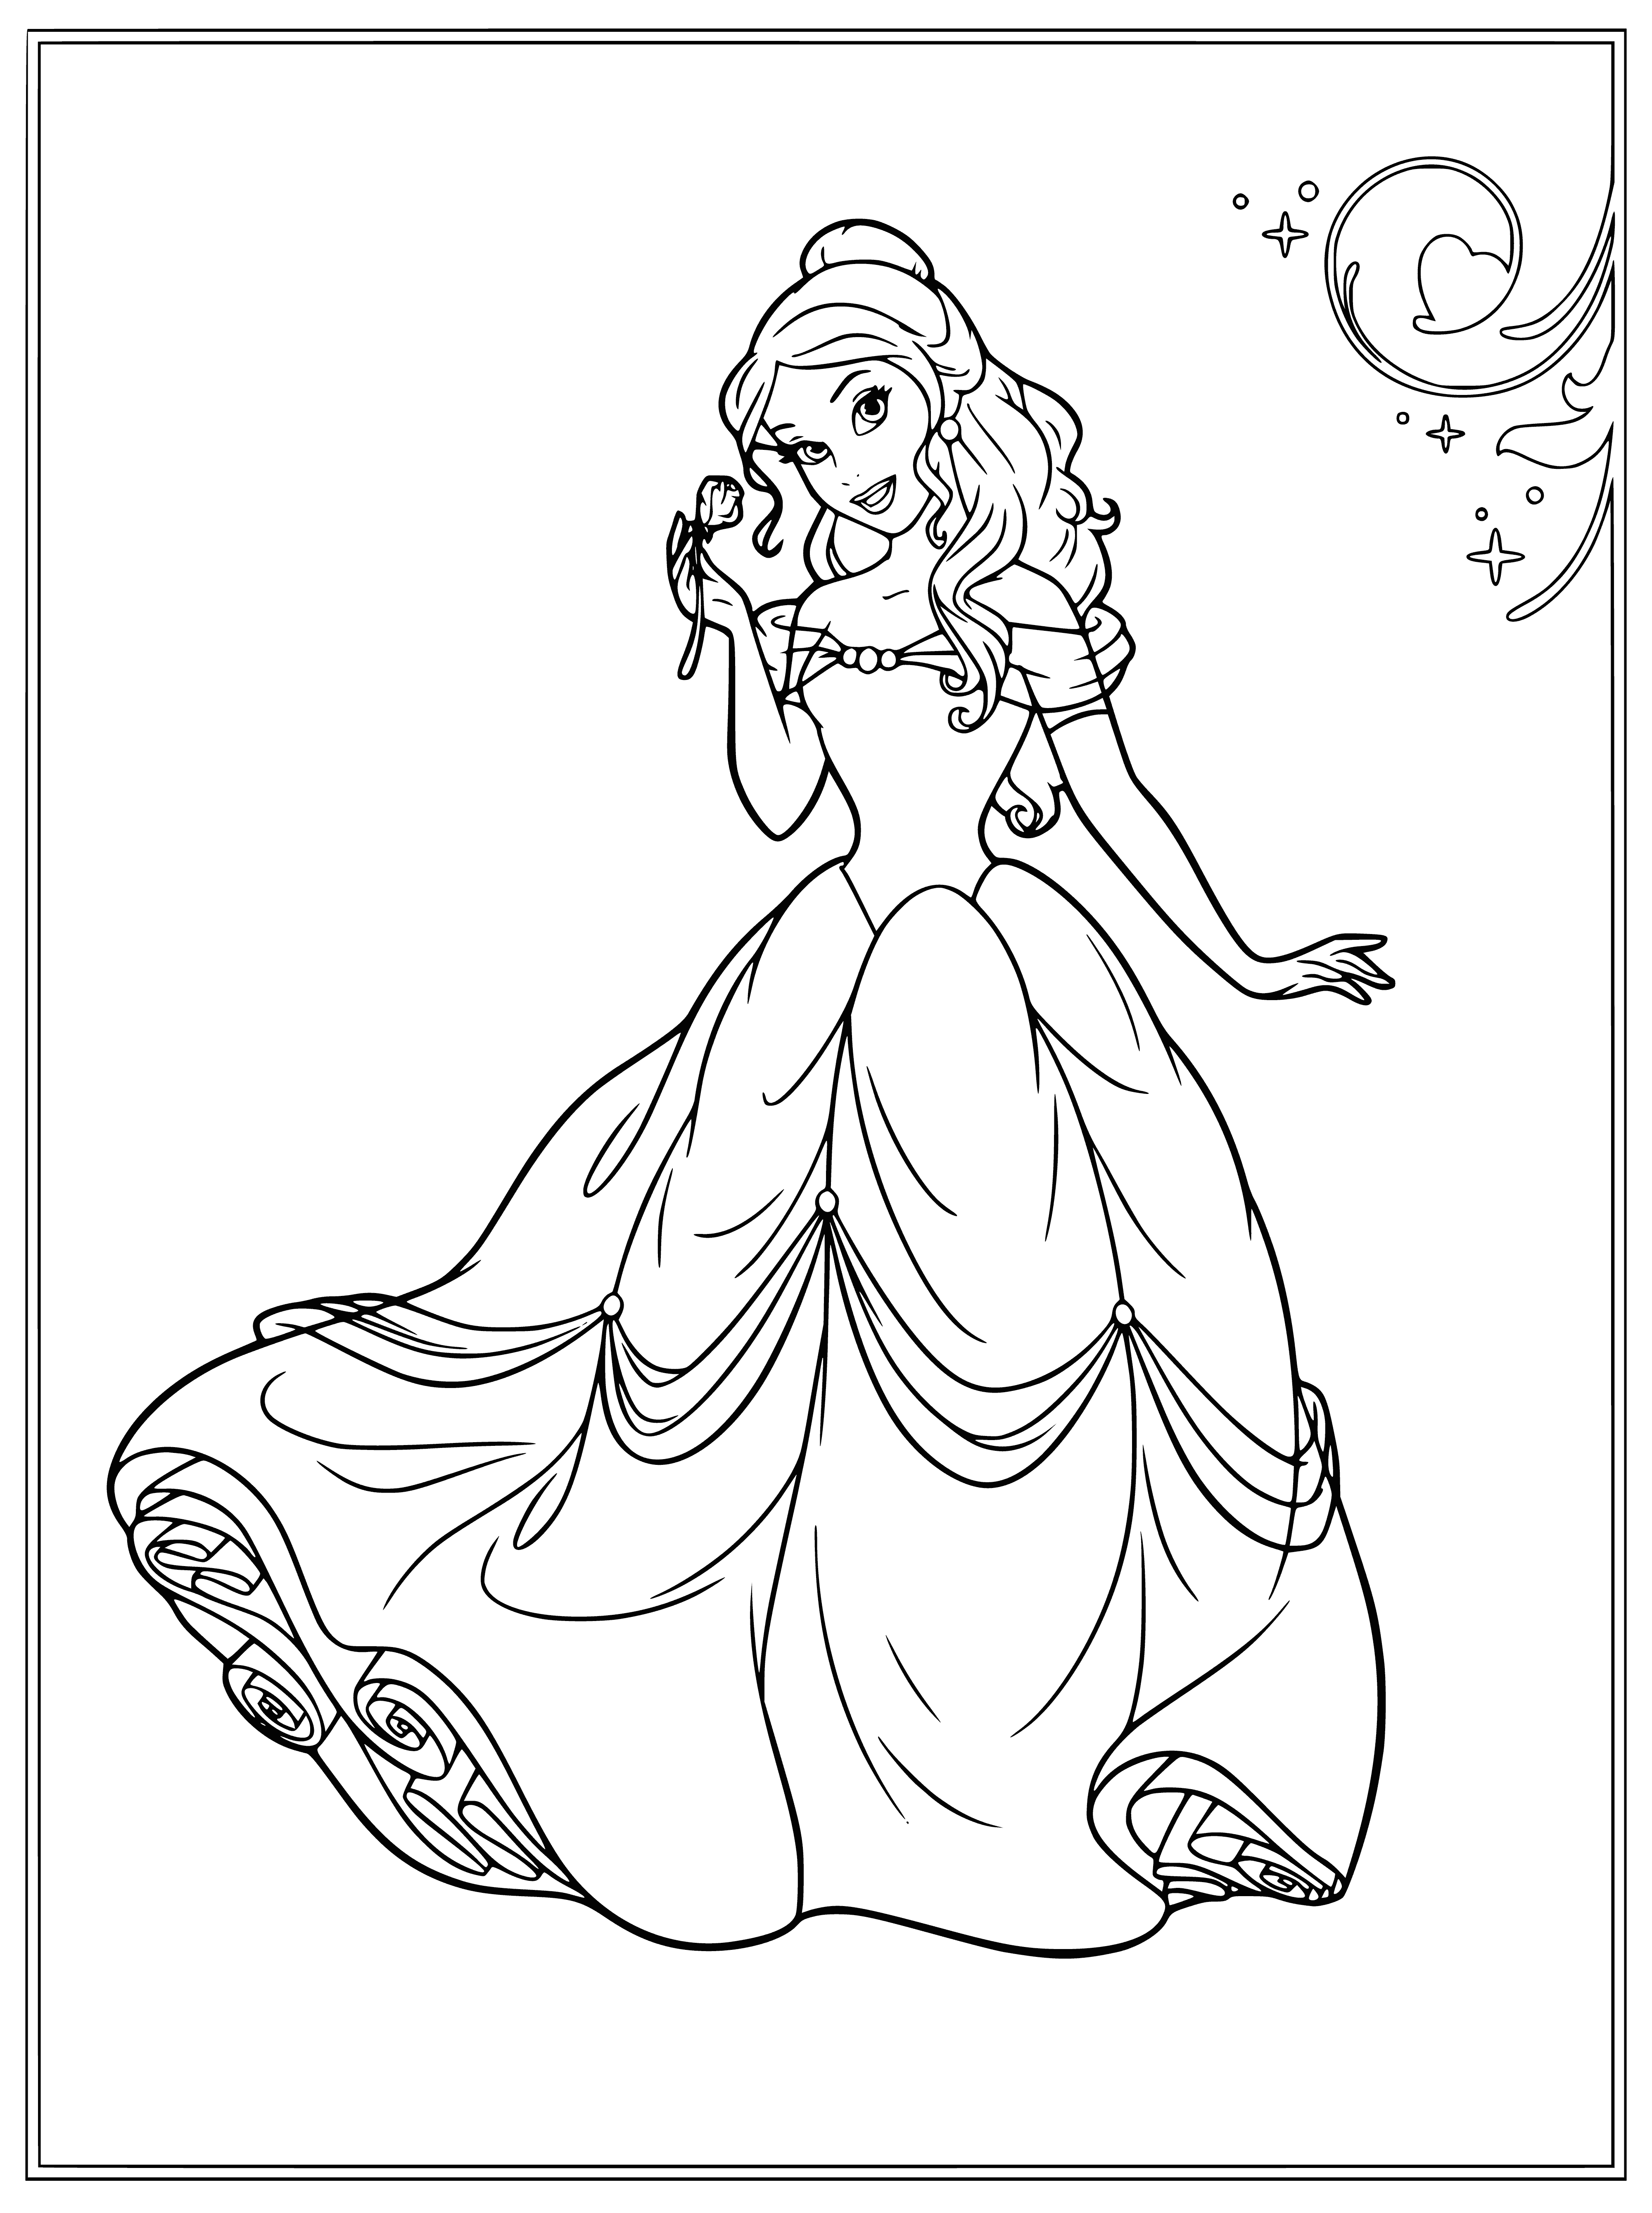 coloring page: Belle coloring in a chair, wearing yellow dress & black sash, looking at viewer with gentle smile, holding book with castle illustration.